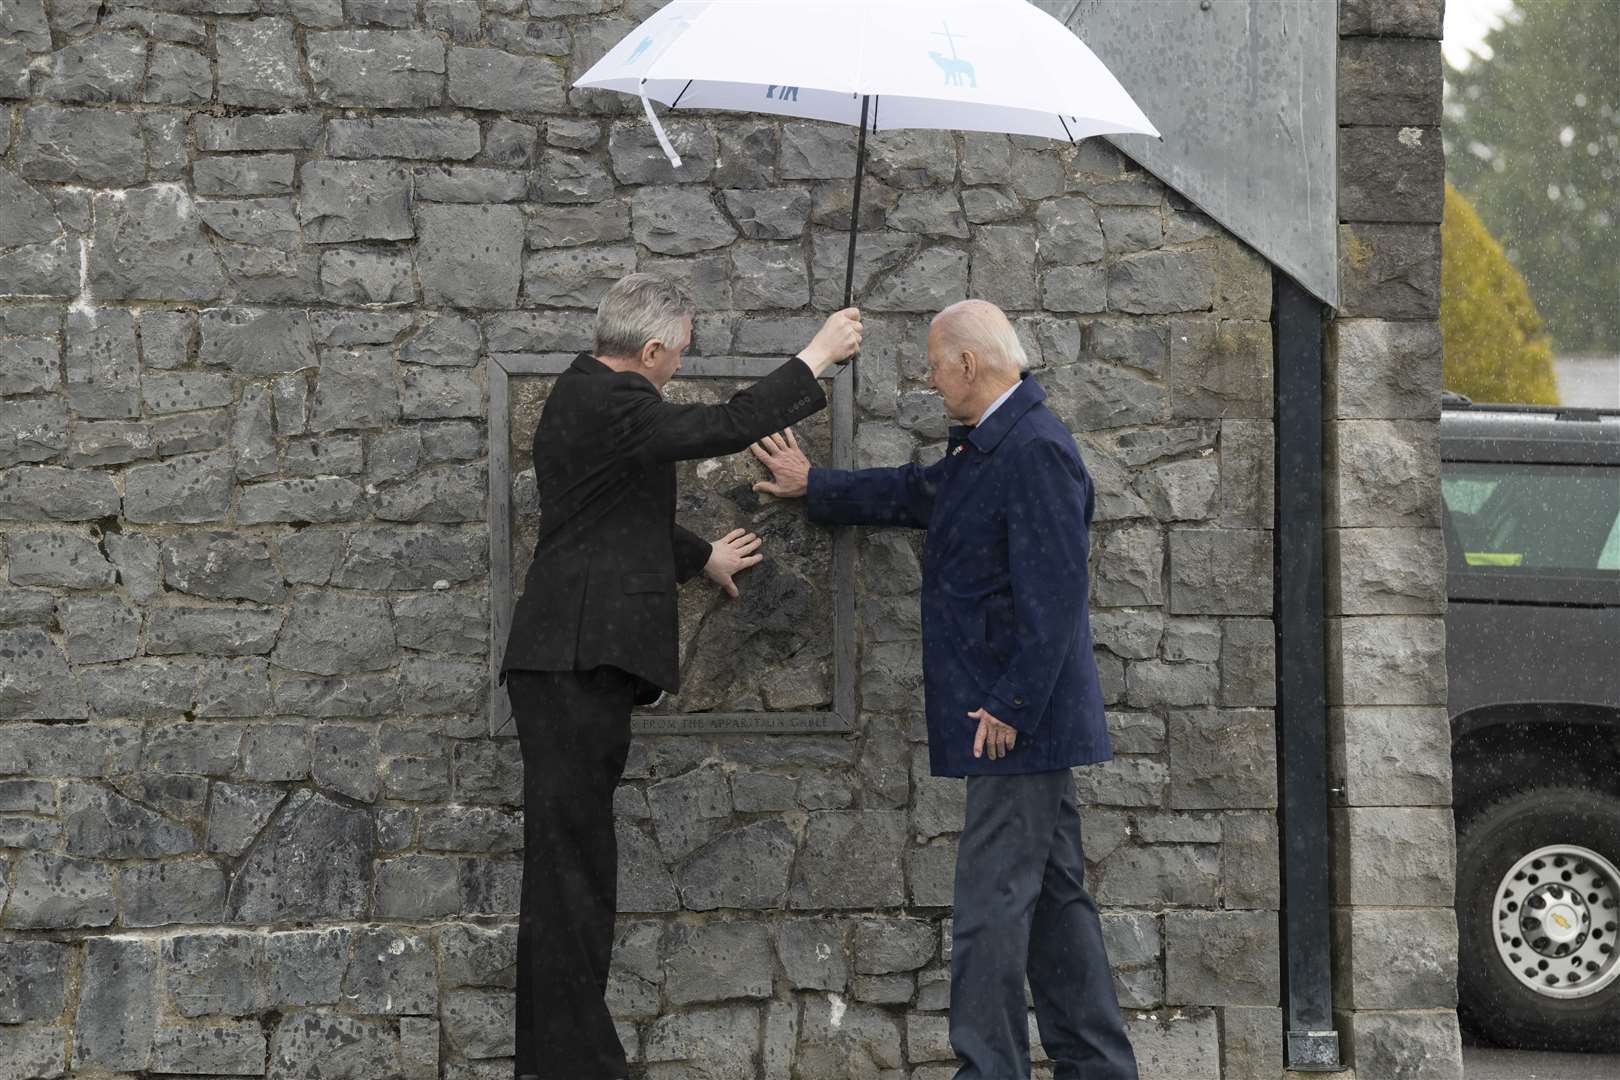 Mr Biden touches the apparition wall at Knock Shrine and Basilica, on the last day of his visit (Andrew Downes/Julien Behal Photography/PA)